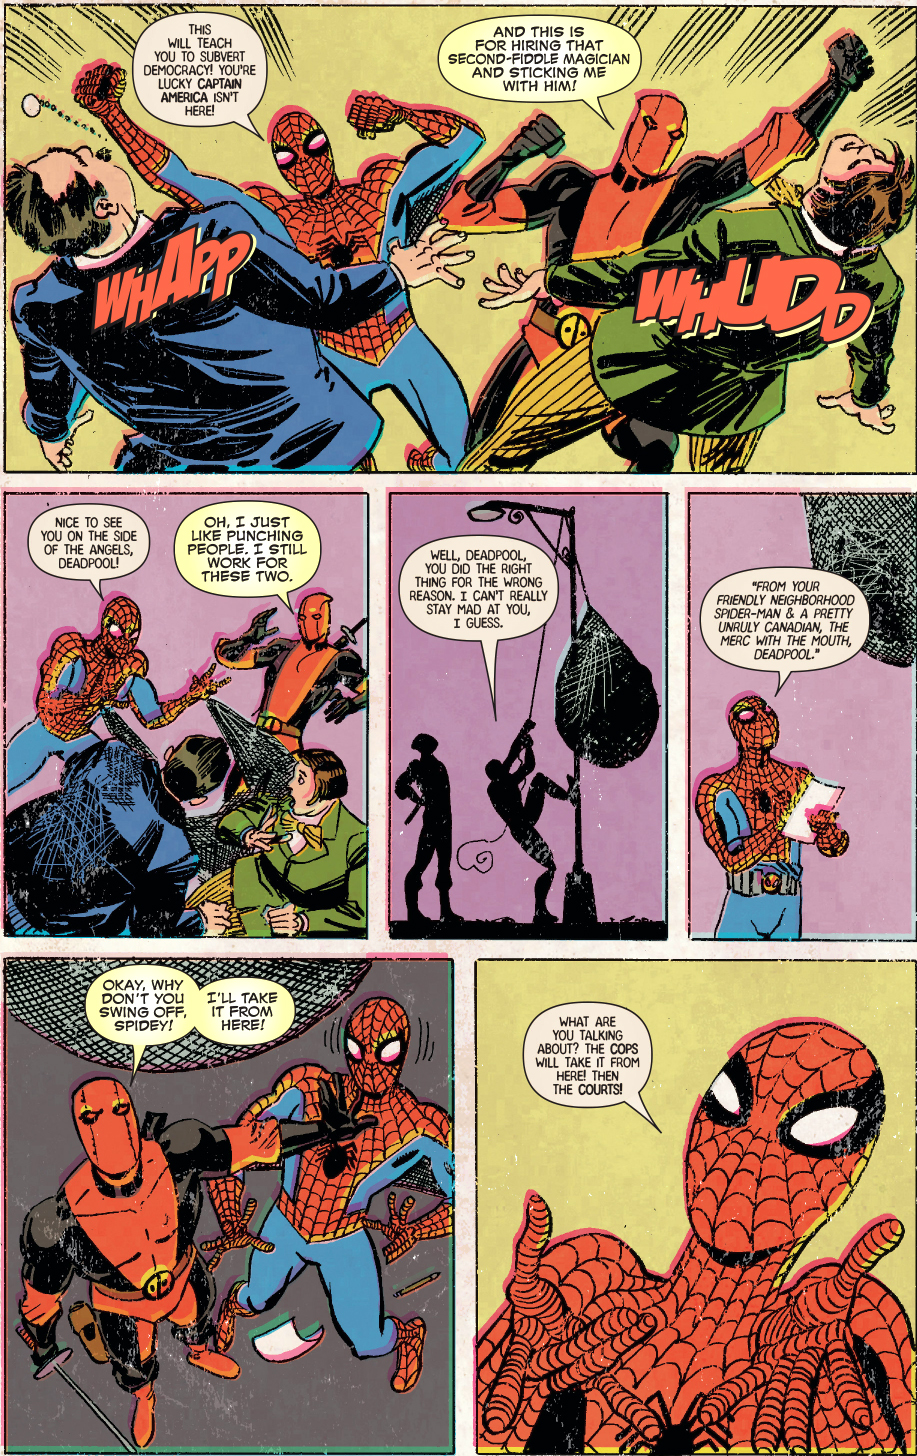 deadpool teaches spider-man about the real world